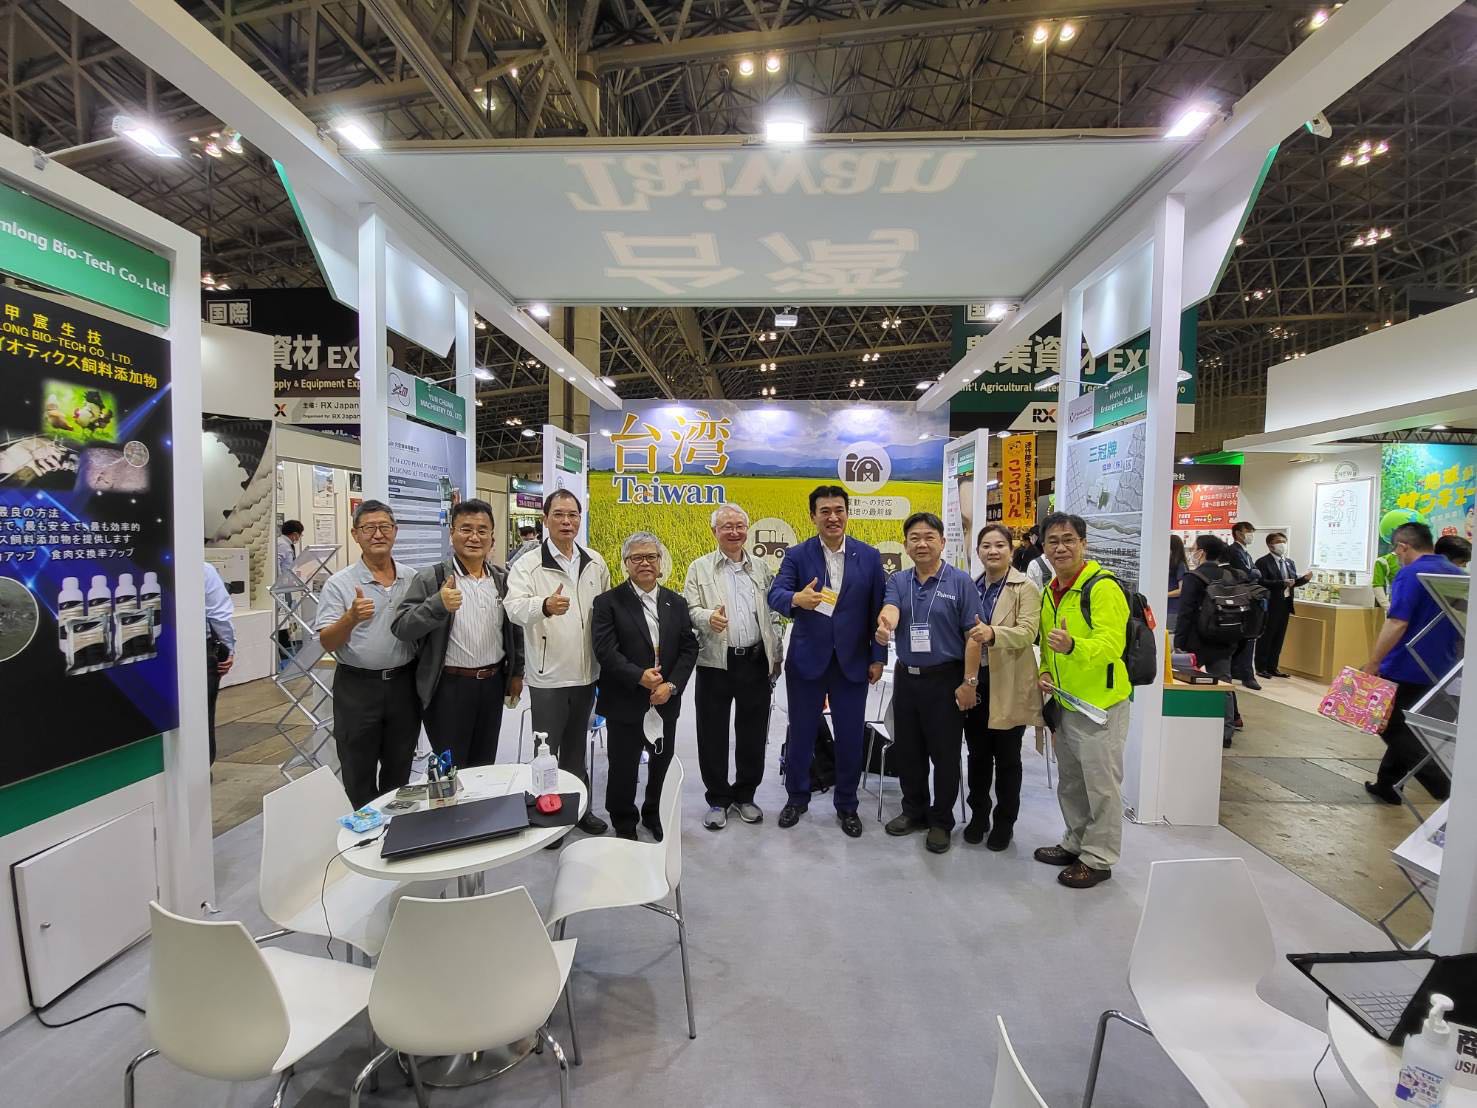 Chyung Ay, chairman of the Taiwan Agricultural Structures Association (fifth from right) invited Haruhisa Fukuda (fourth from right), president of the Japanese firm Nepon, to visit the Taiwan Pavilion and exchange ideas. This group photo also includes professors from National Chiayi University (first to fourth from left) and Huang Wen-yi, vice president of the Agricultural Technology Research Institute.